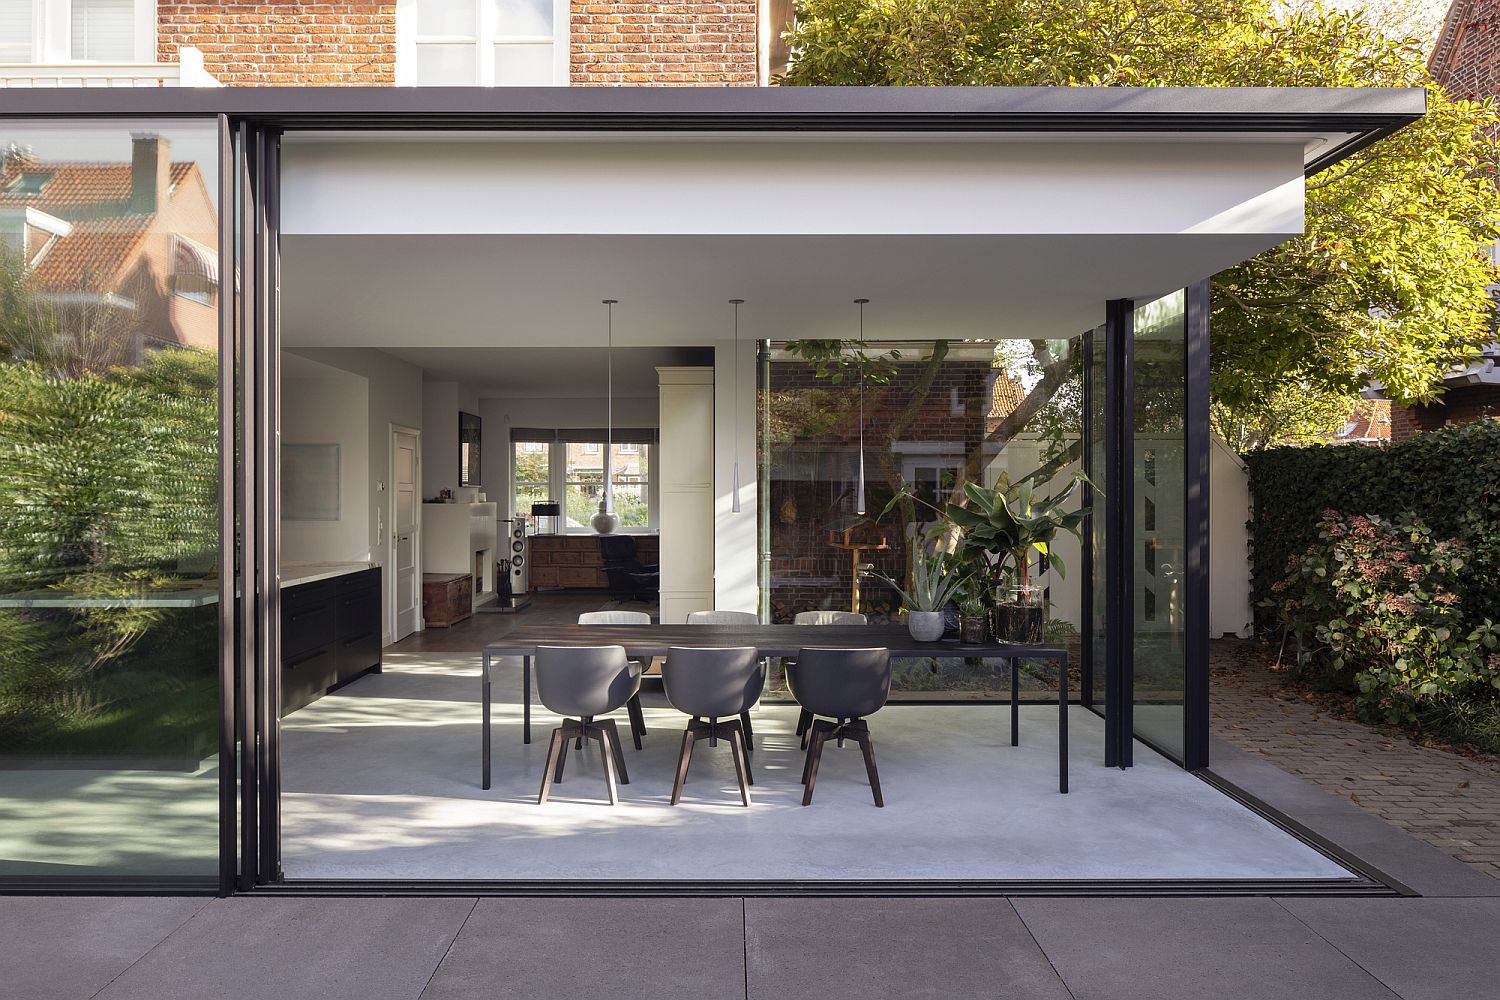 Sliding-glass-walls-around-the-extension-of-the-house